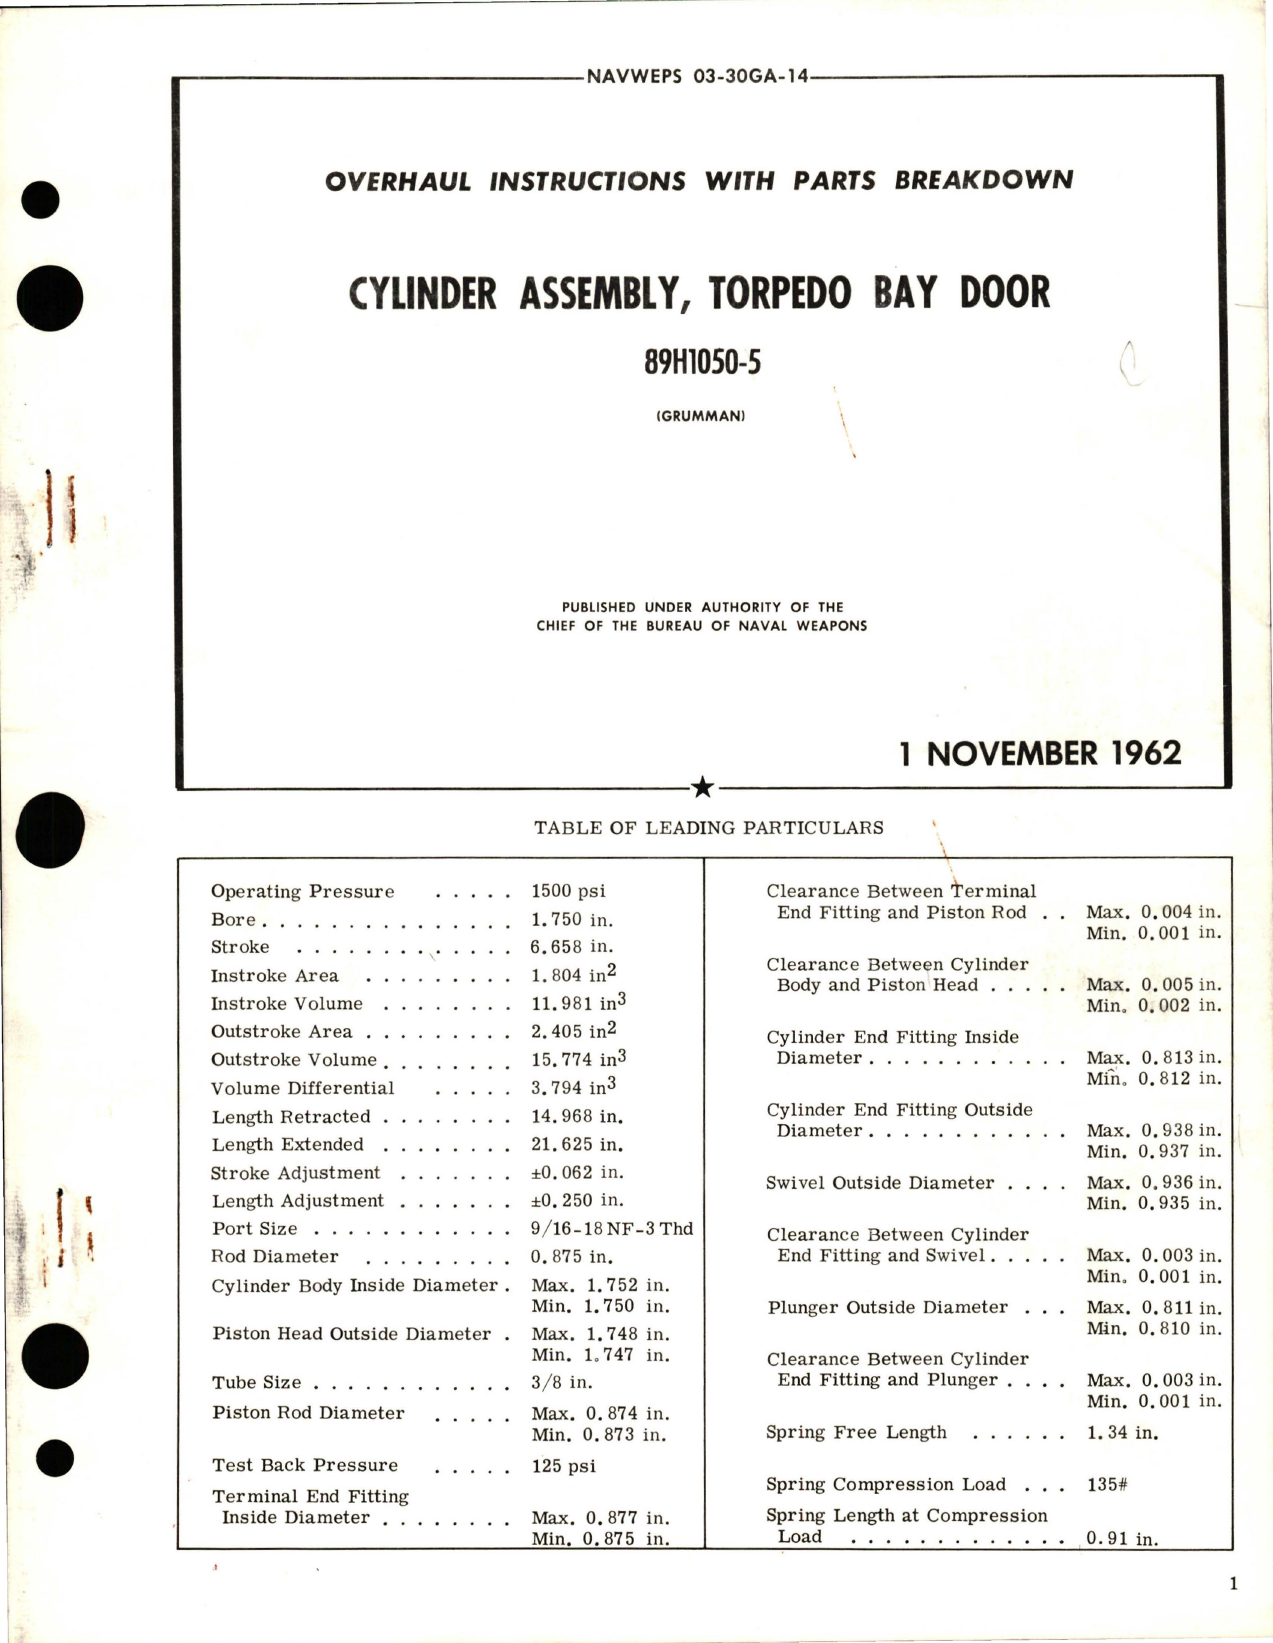 Sample page 1 from AirCorps Library document: Overhaul Instructions with Parts Breakdown for Torpedo Bay Door Cylinder Assembly - 89H1050-5